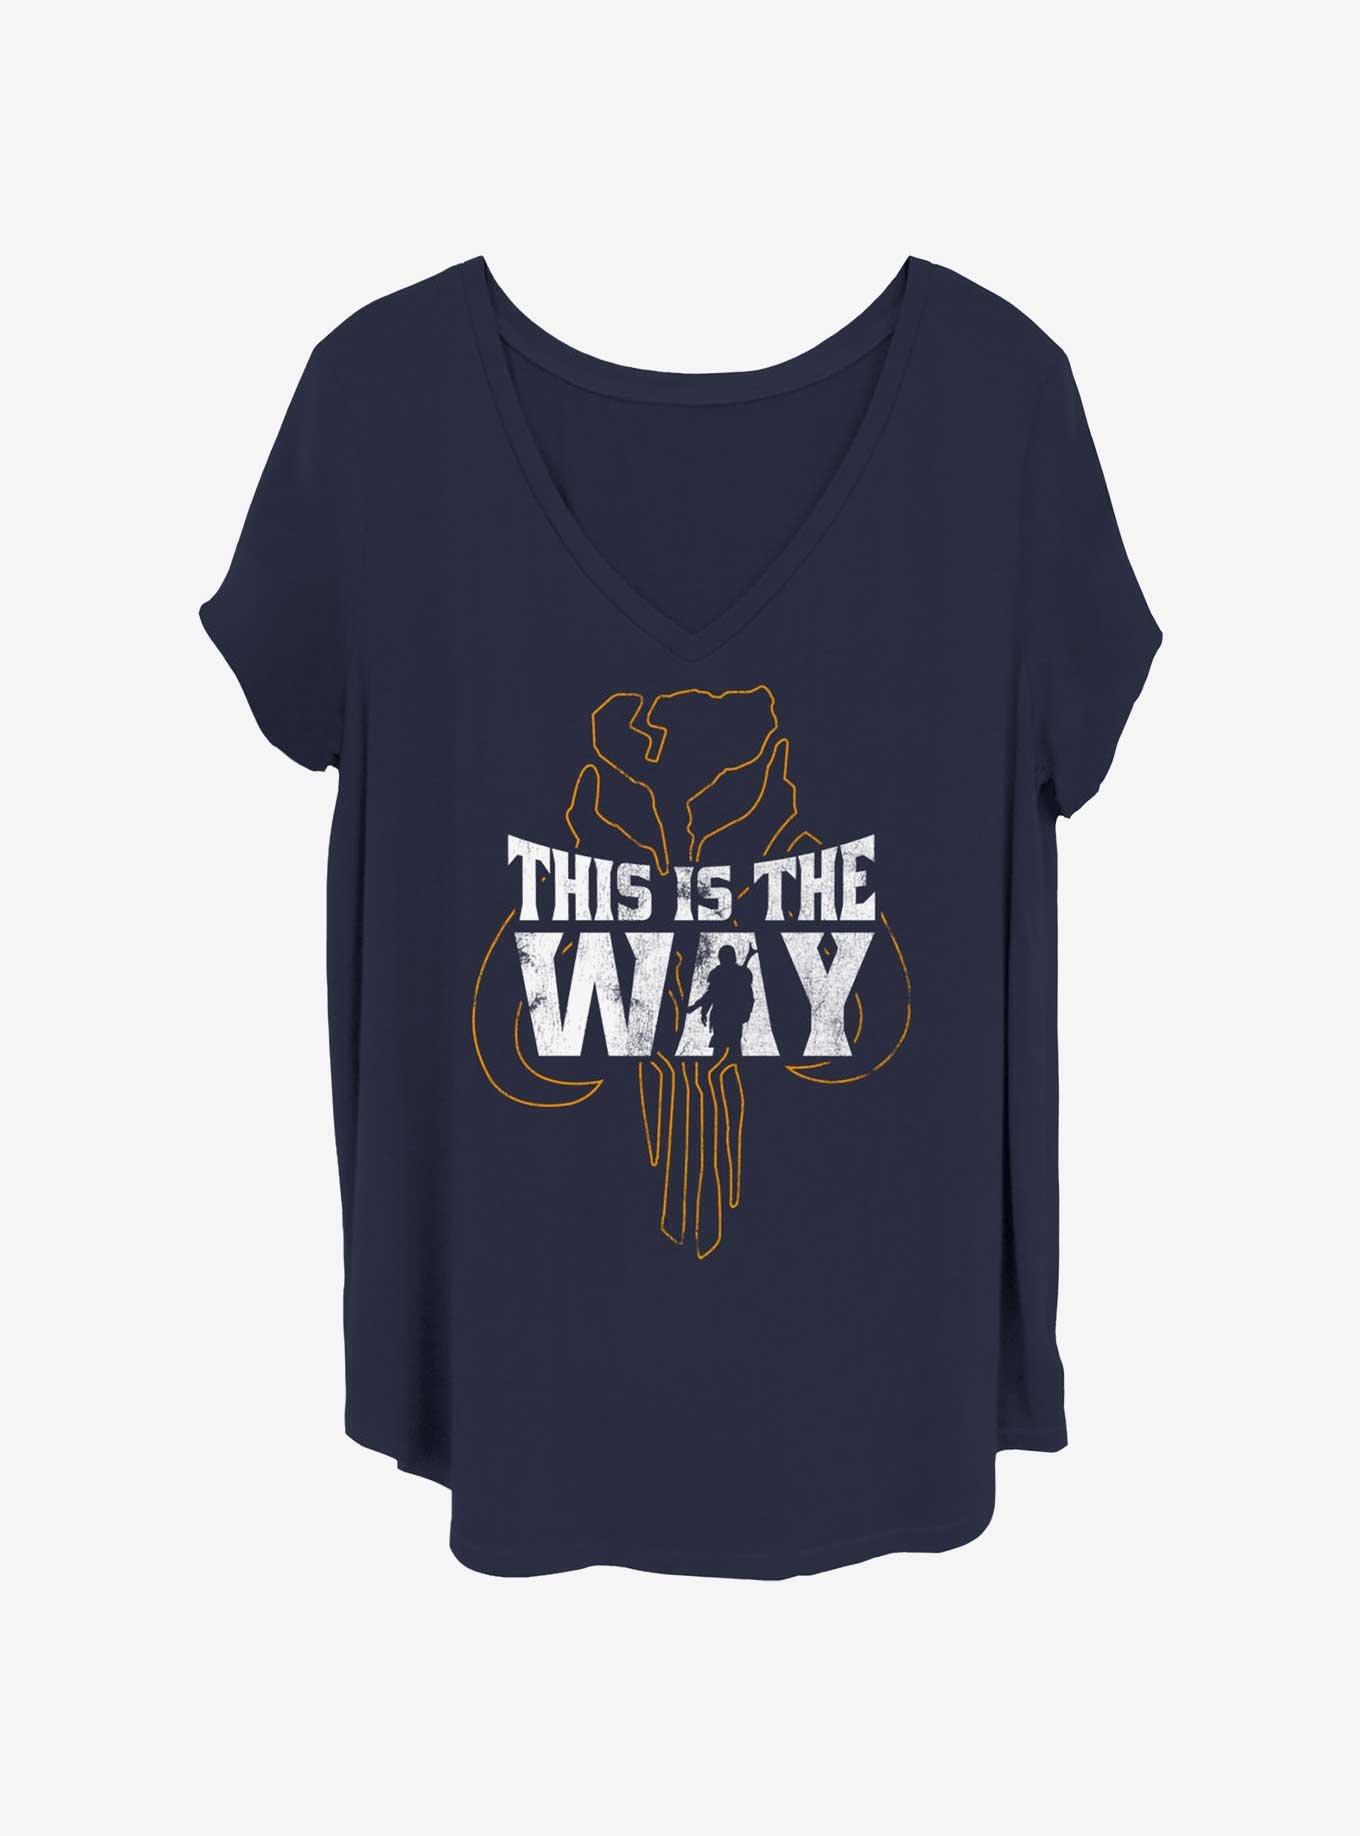 Star Wars The Mandalorian This Is The Way Girls T-Shirt Plus Size, NAVY, hi-res